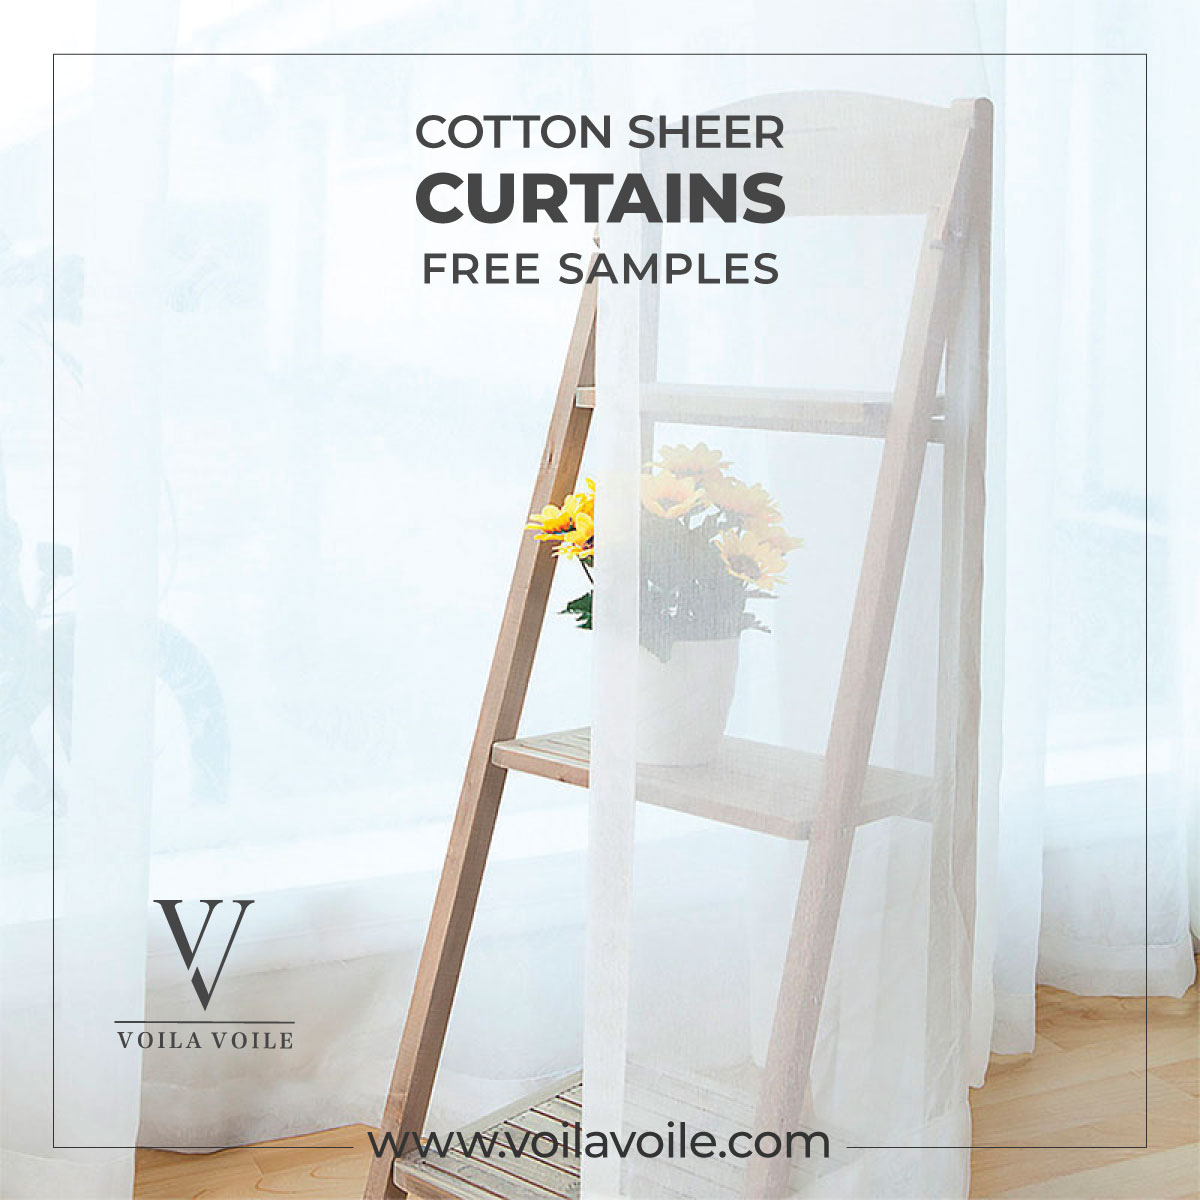 Cotton Sheer Curtains